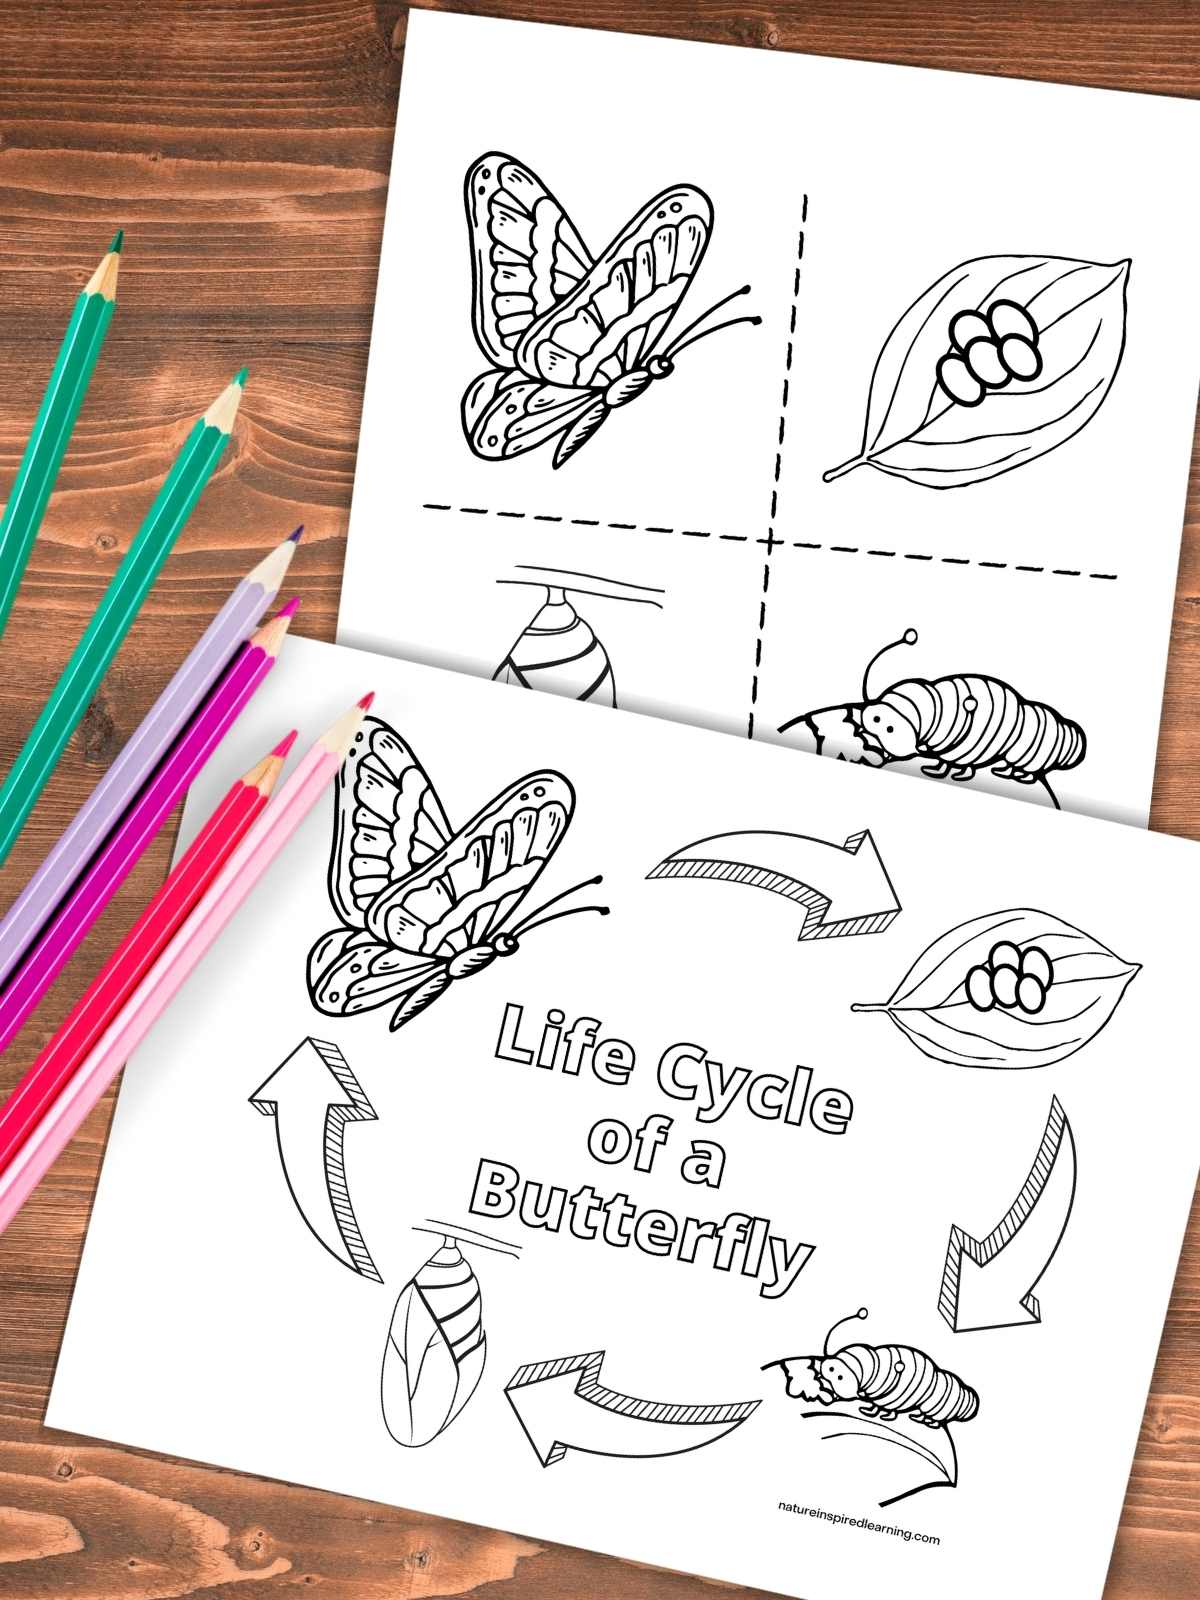 two printable life cycle of a butterfly coloring pages overlapping on a wooden background with colored pencils left side